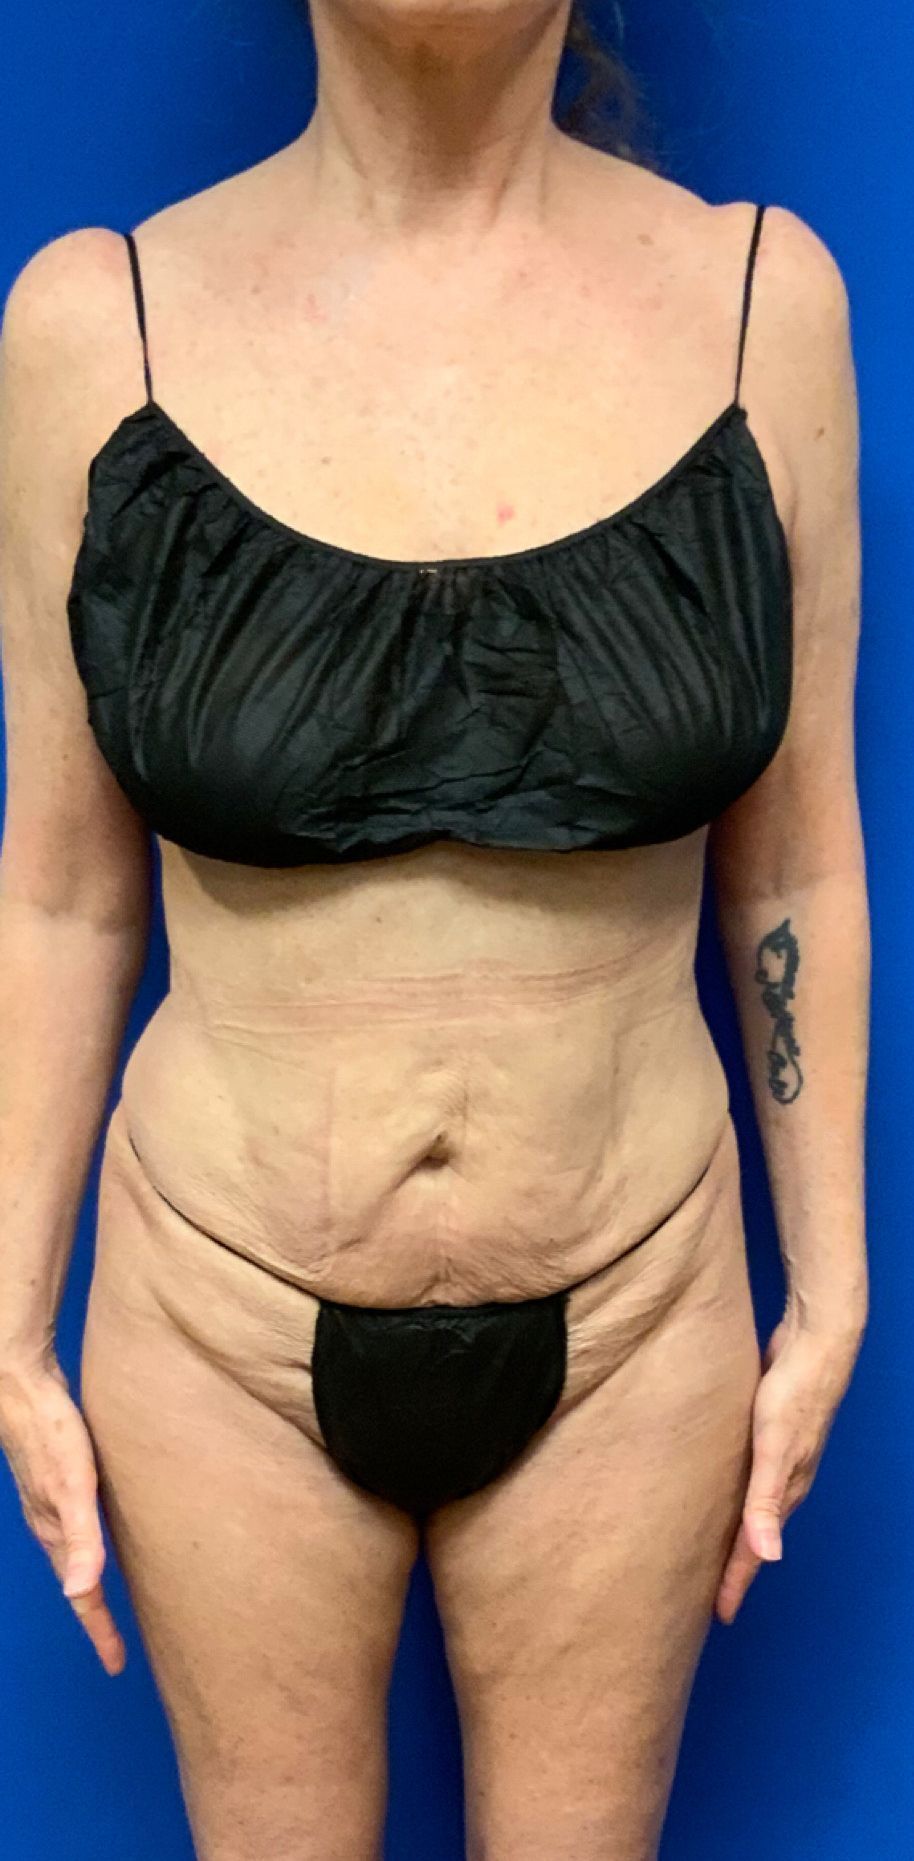 After Waist and Legs Sculpting - Columbus, OH - Simply Sculpt